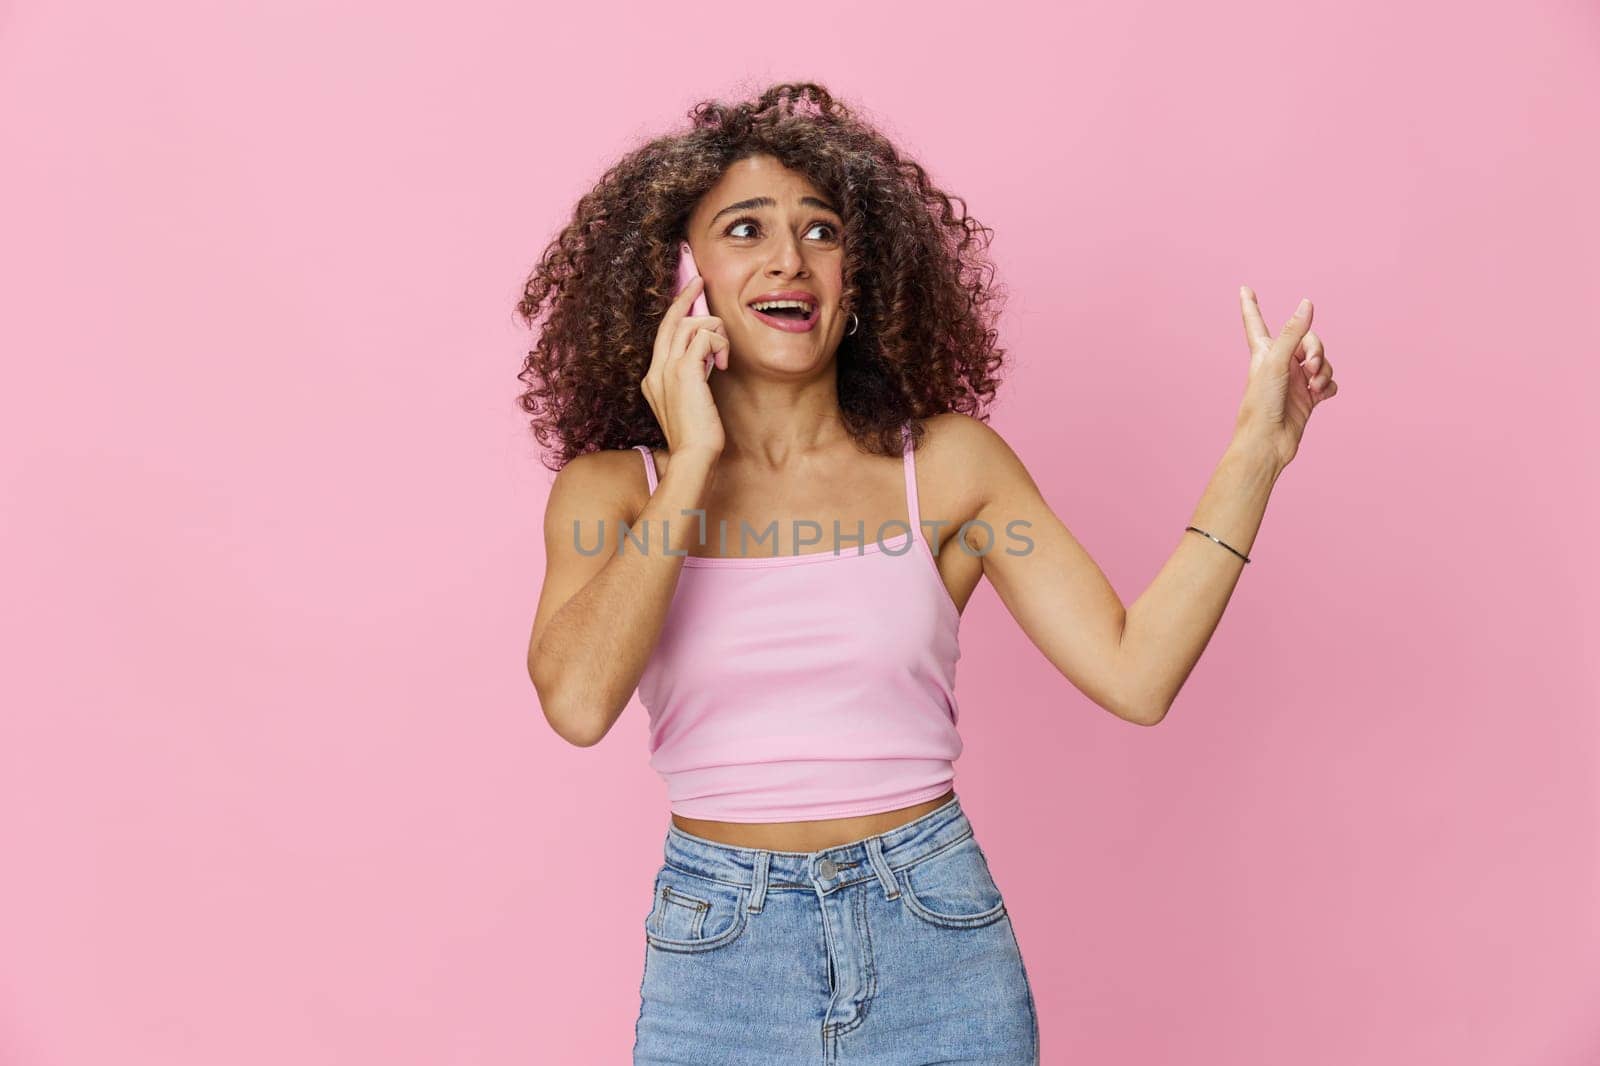 Woman with curly afro hair talking on the phone in a pink top and jeans on a pink background, smile, happiness, finger pointing copy space. High quality photo